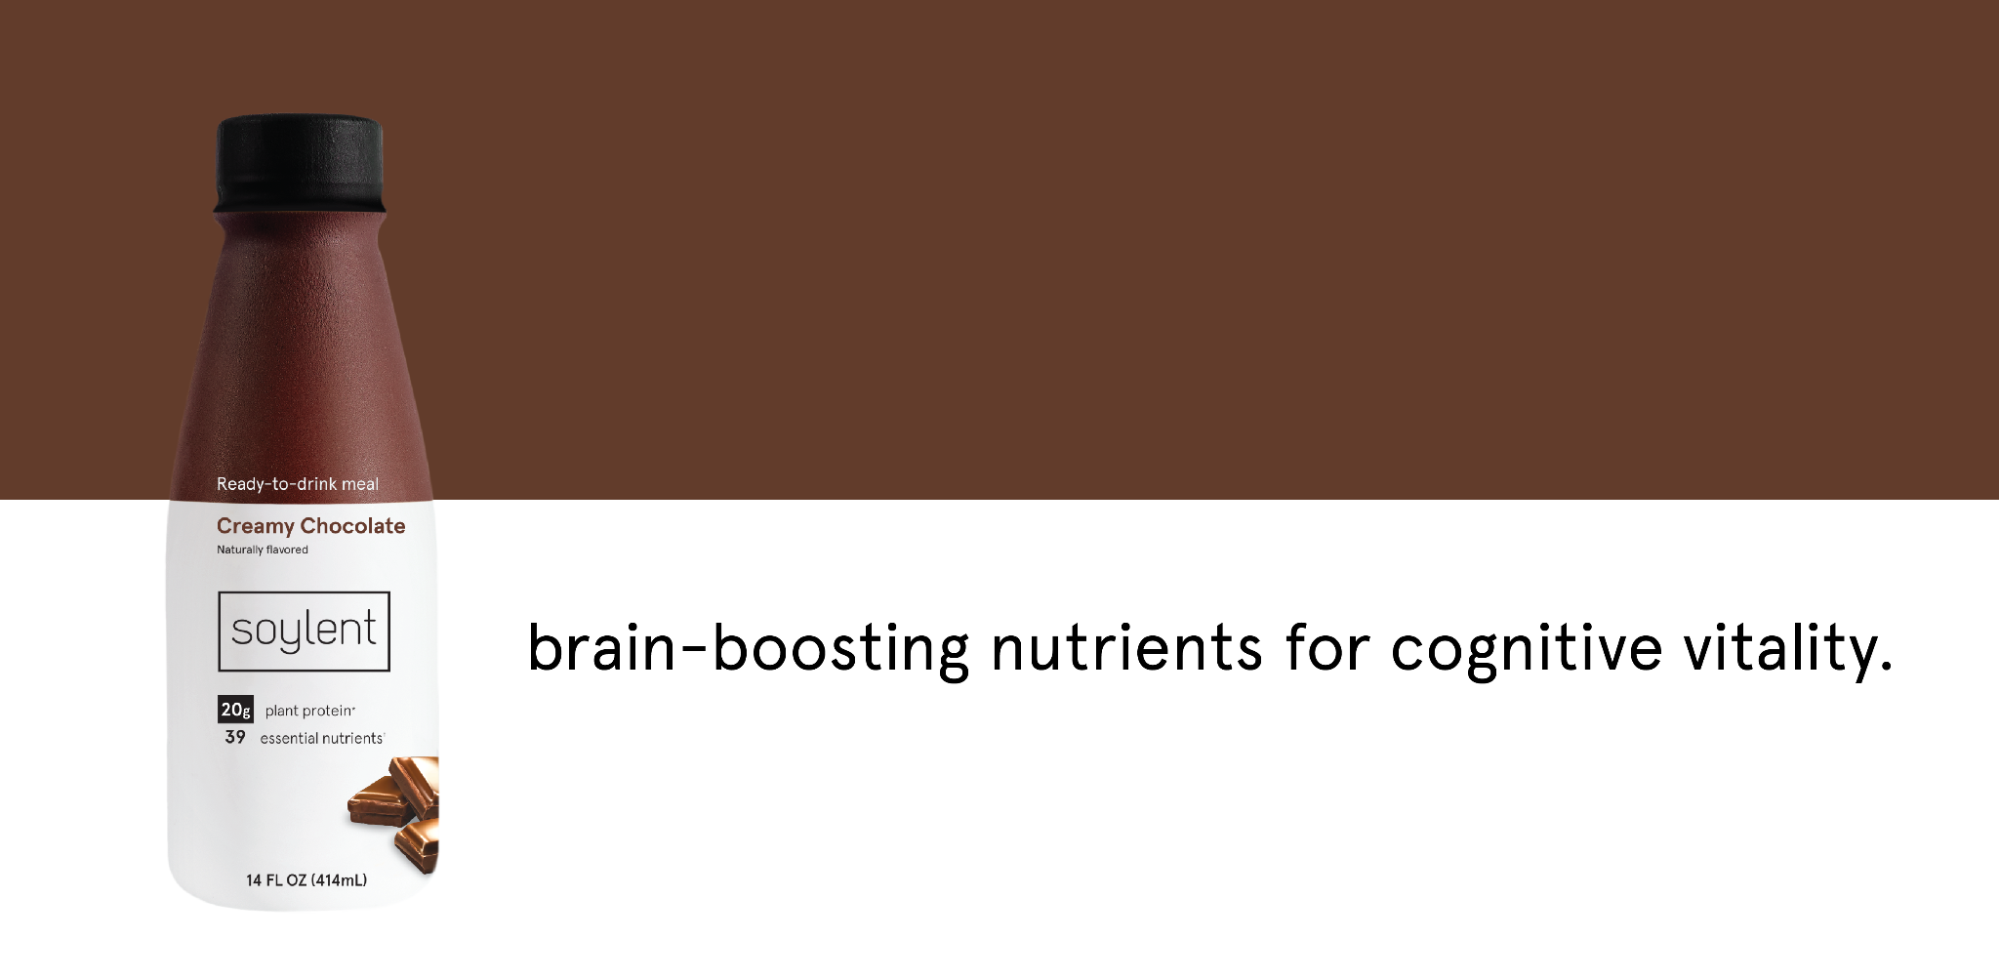 brain-boosting nutrients for cognitive vitality